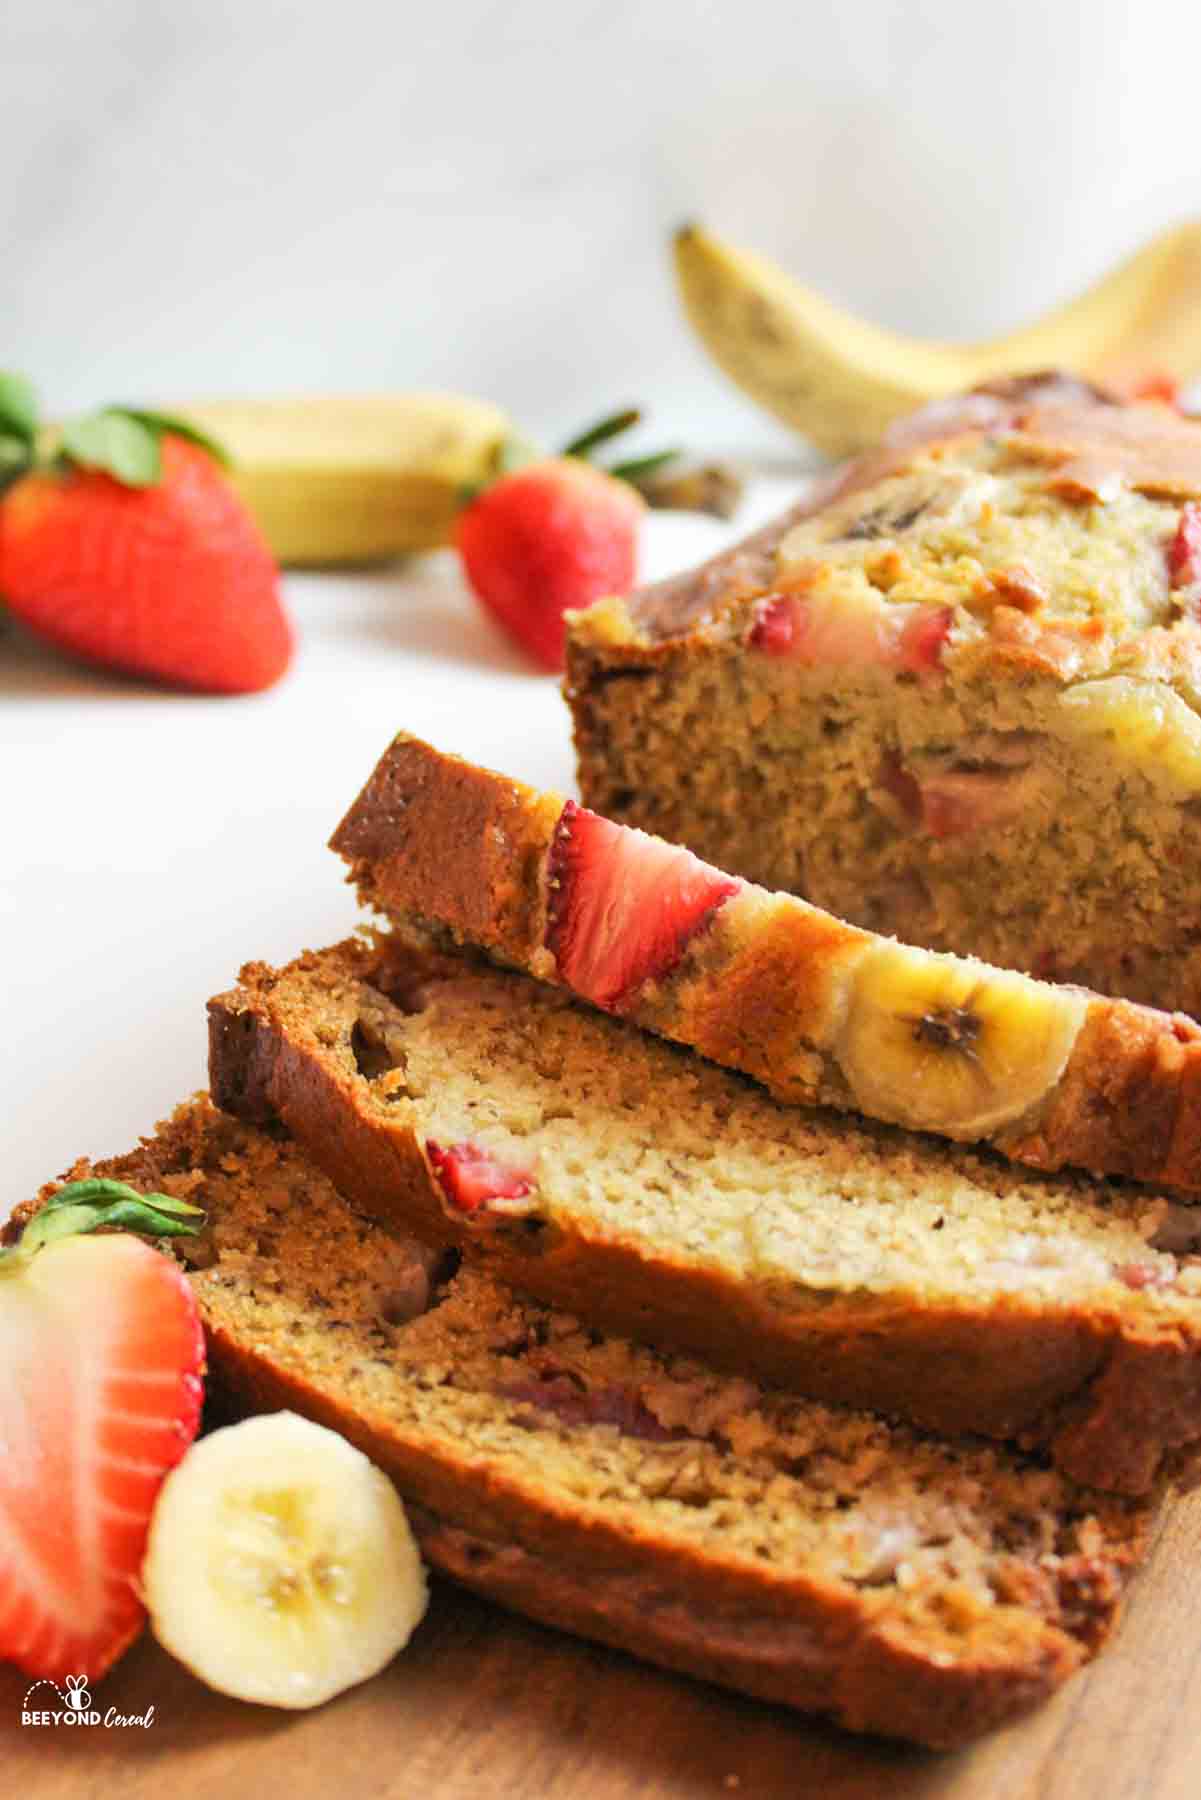 an upclose view of sliced strawberry banana bread